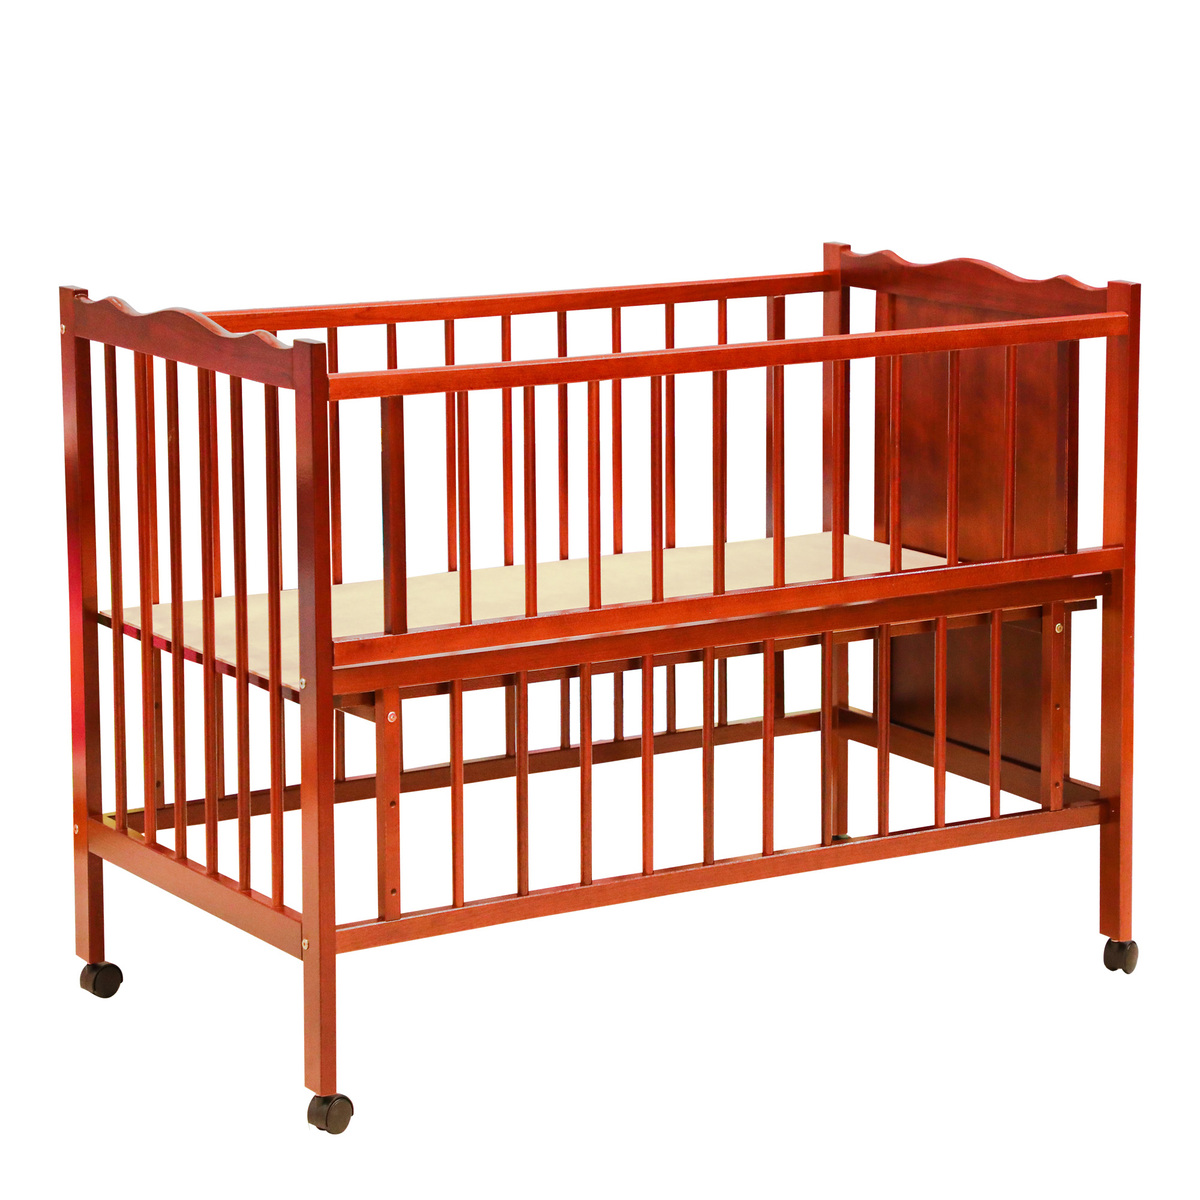 FirstStep First Step Baby Wooden Cot TW-C8AESPESSO Assorted